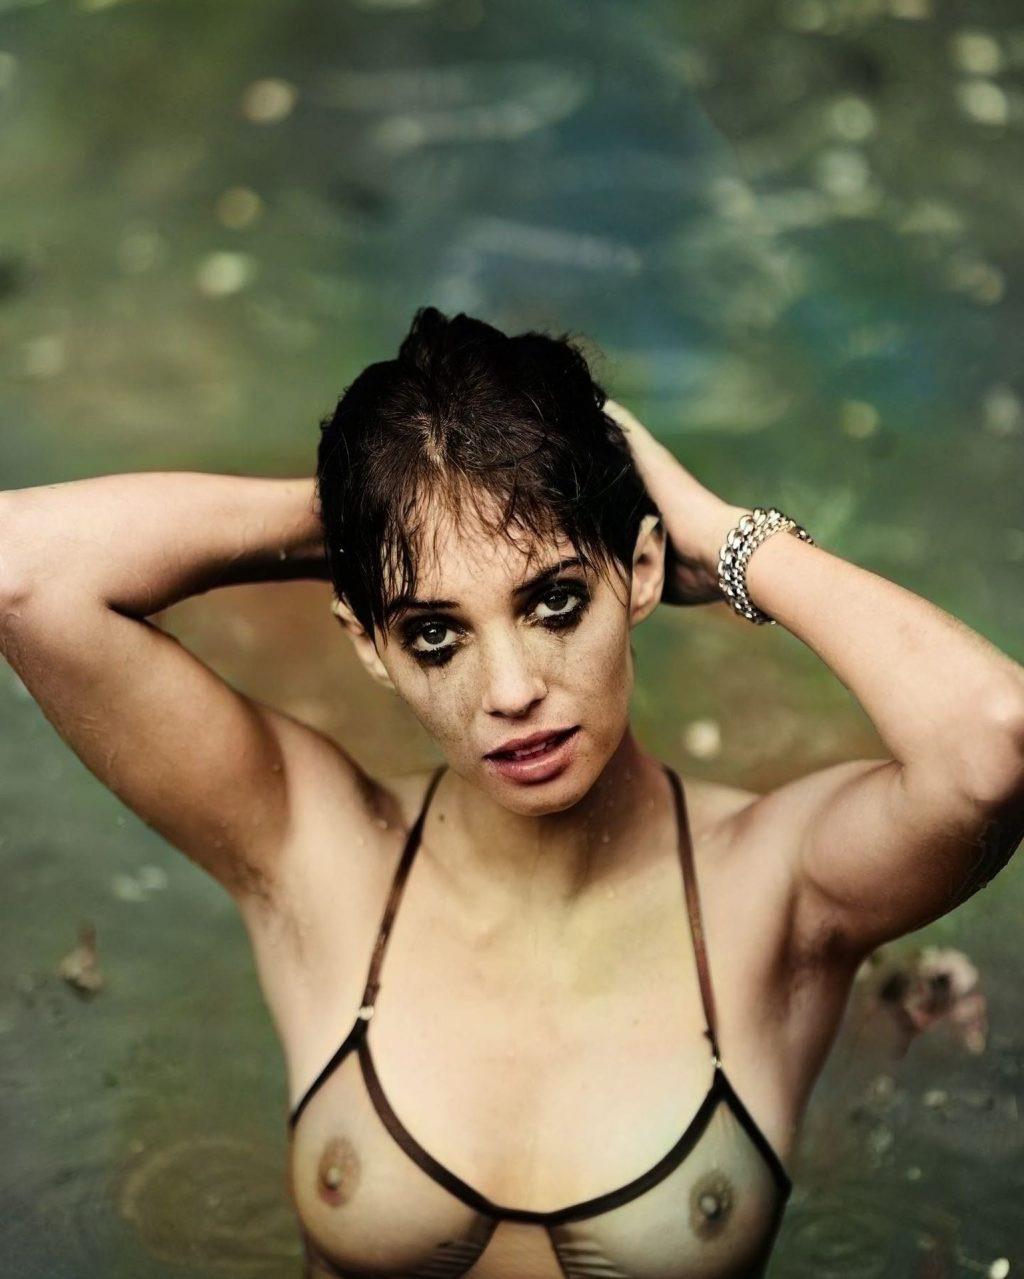 Maya Hawke poses in a see through bra in a photoshoot